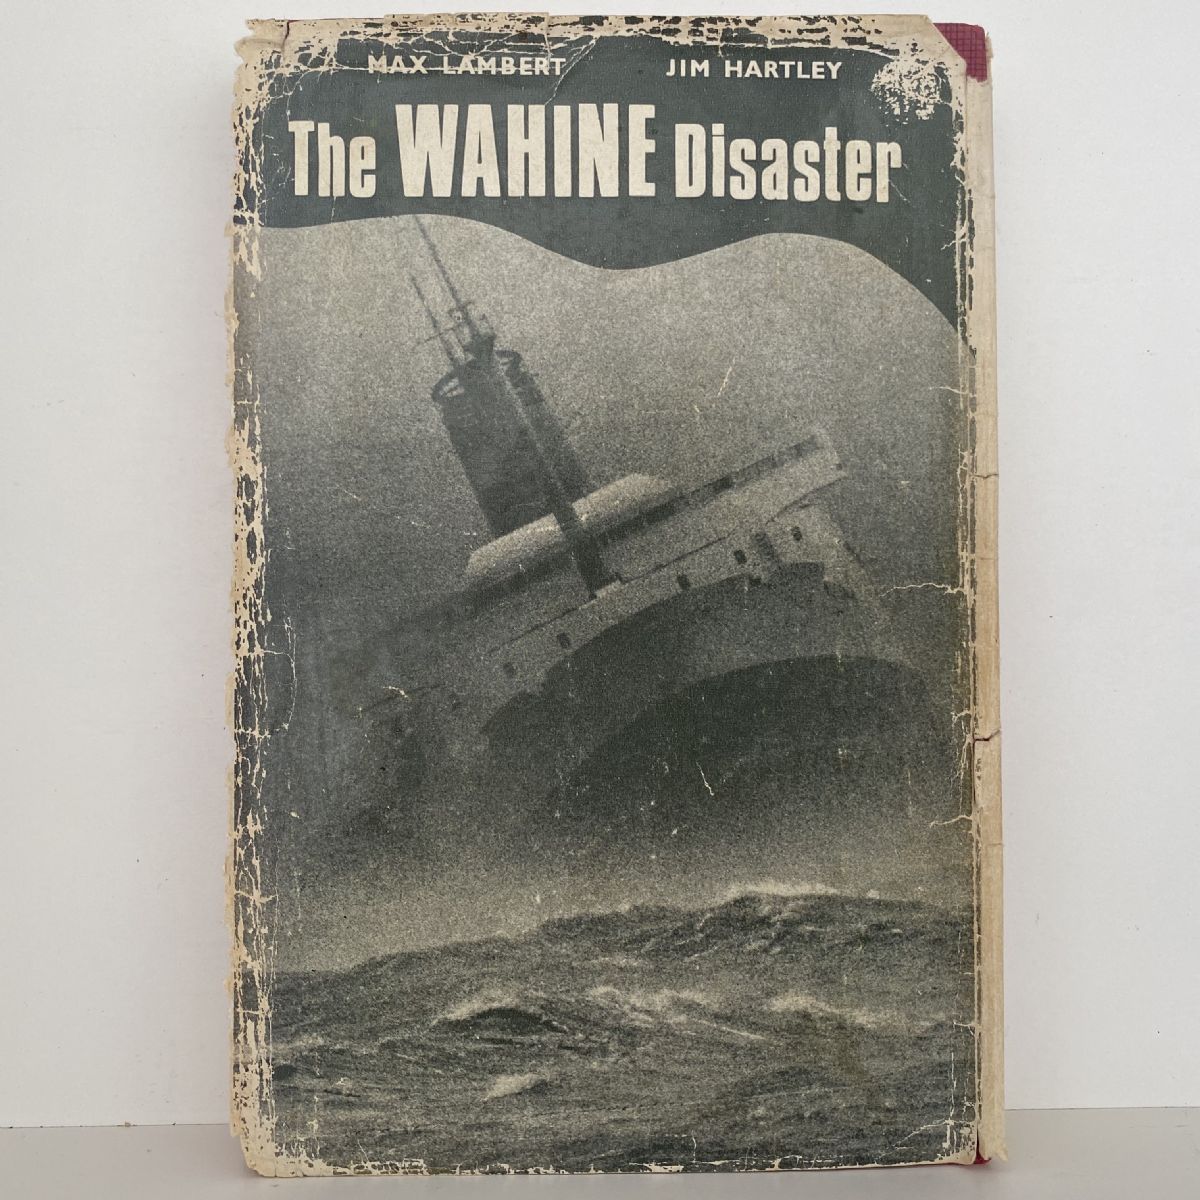 THE WAHINE DISASTER